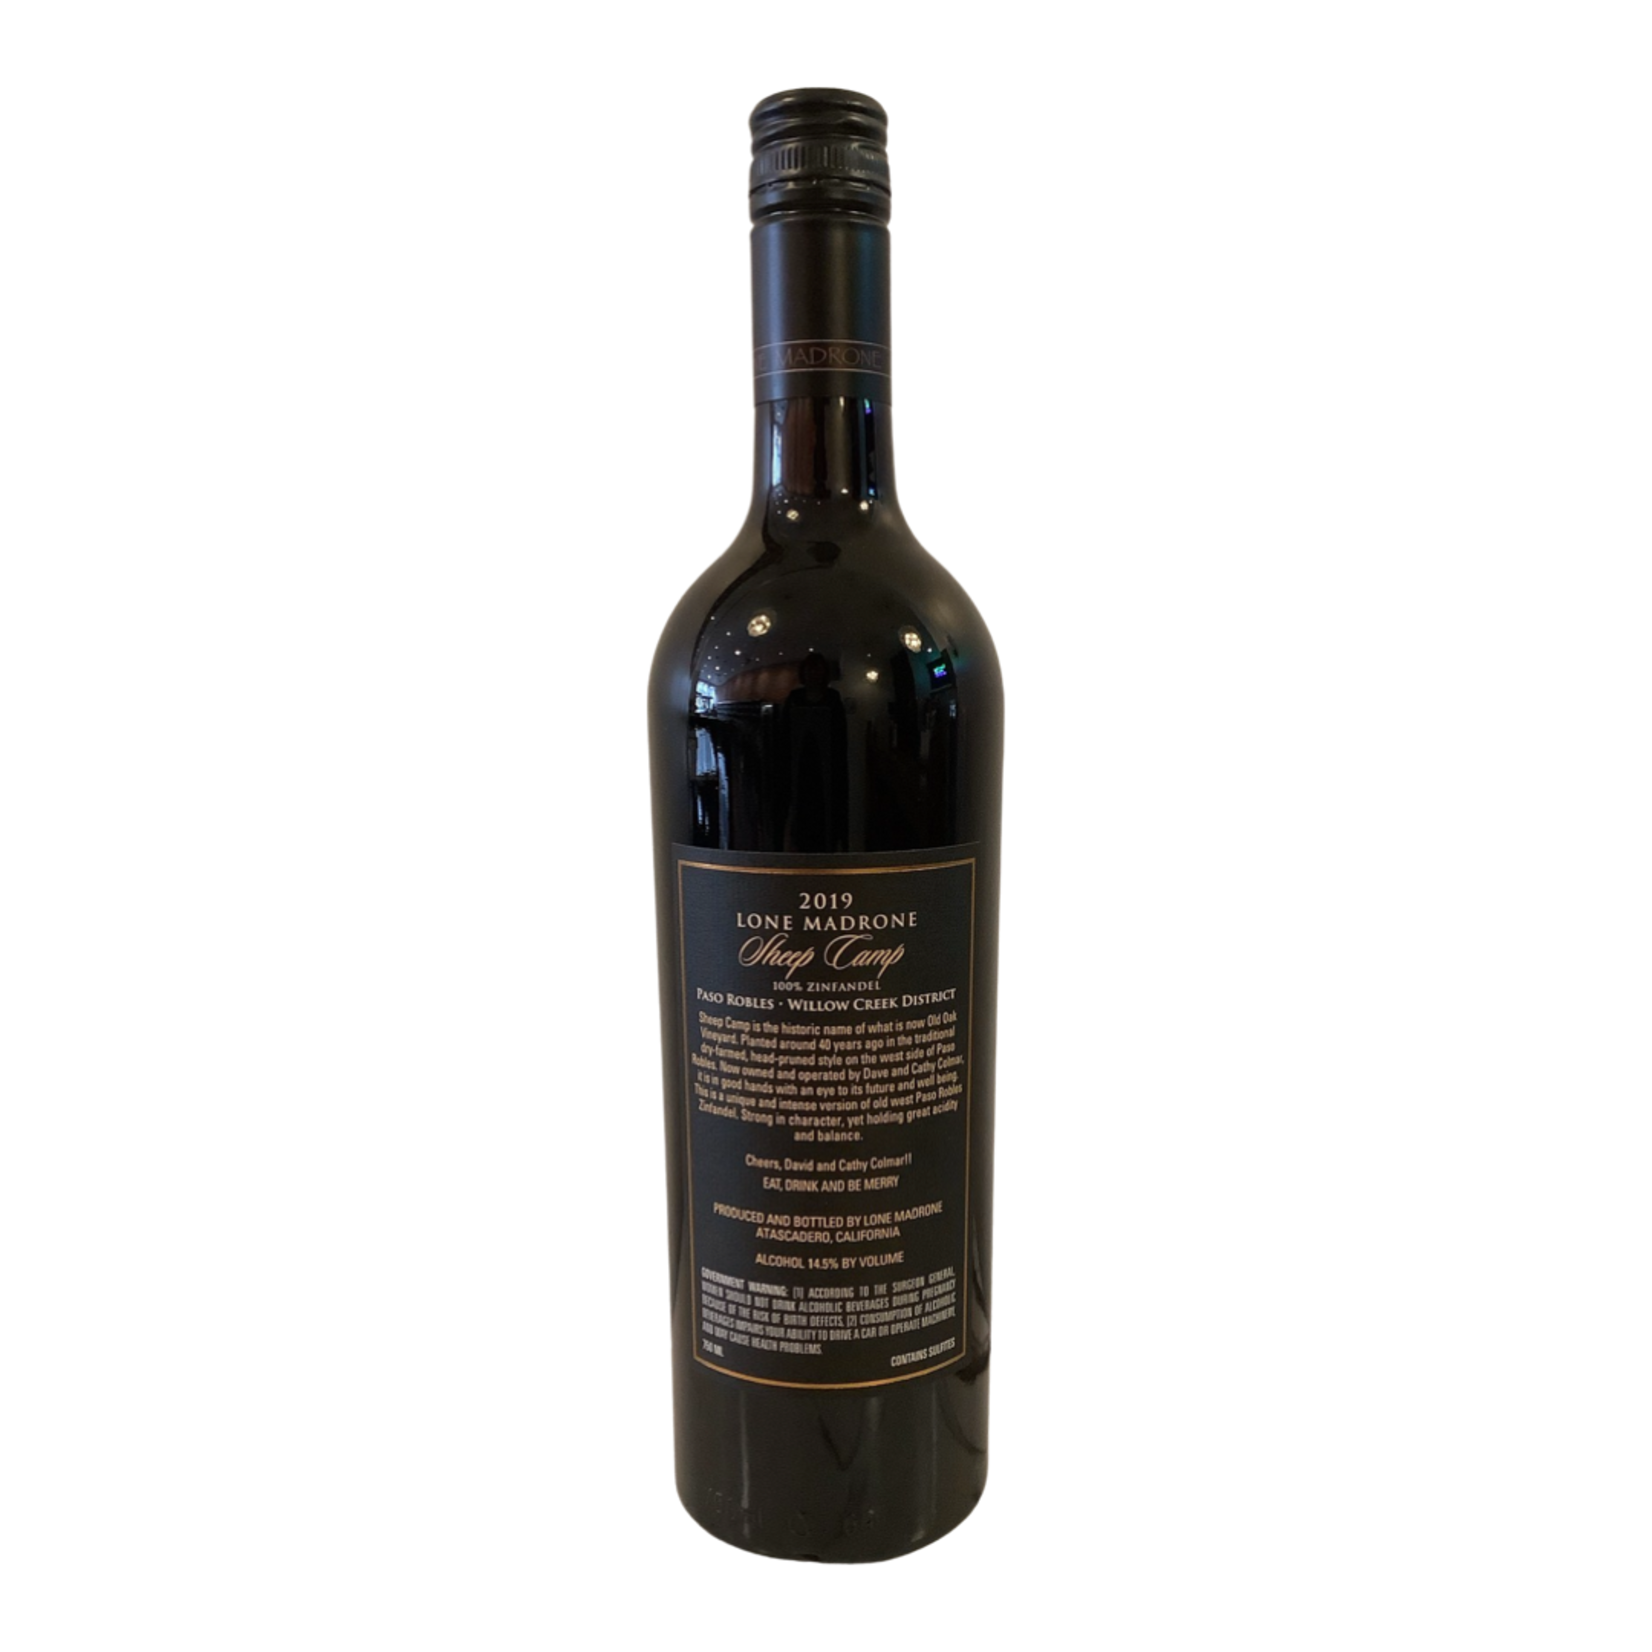 2019 Lone Madrone "Sheep Camp" Zinfandel, Willow Creek District | Paso Robles CA